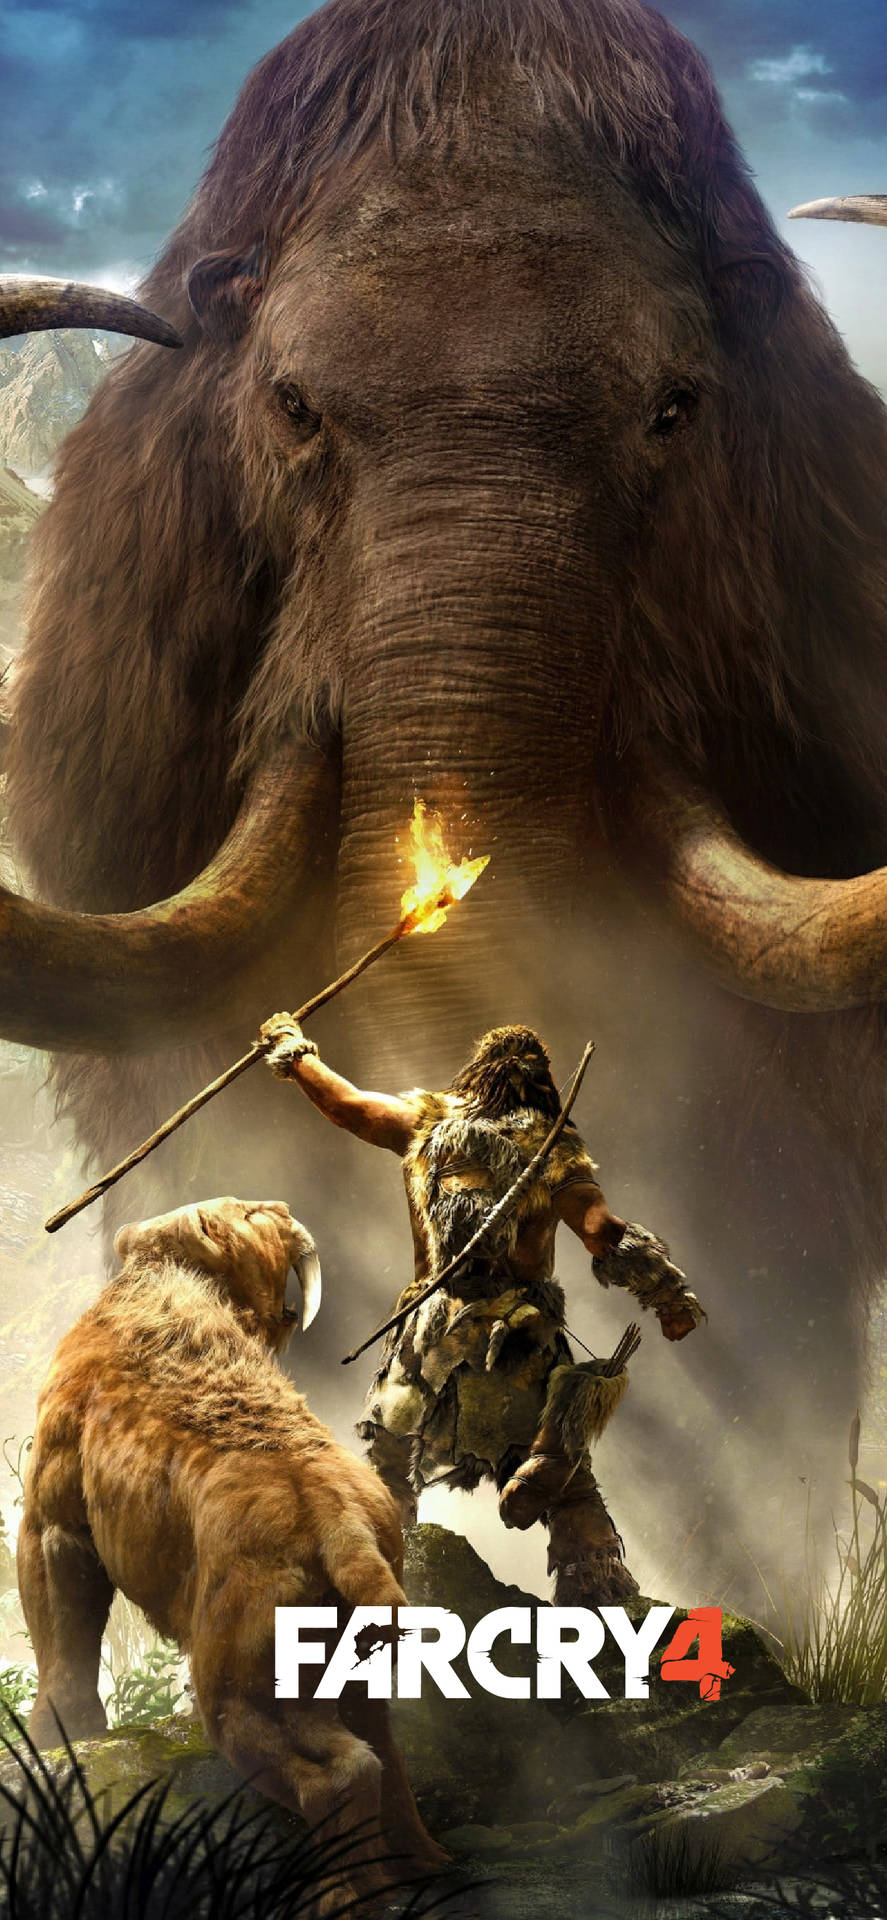 Ajay Facing Mammoth Far Cry Iphone Background